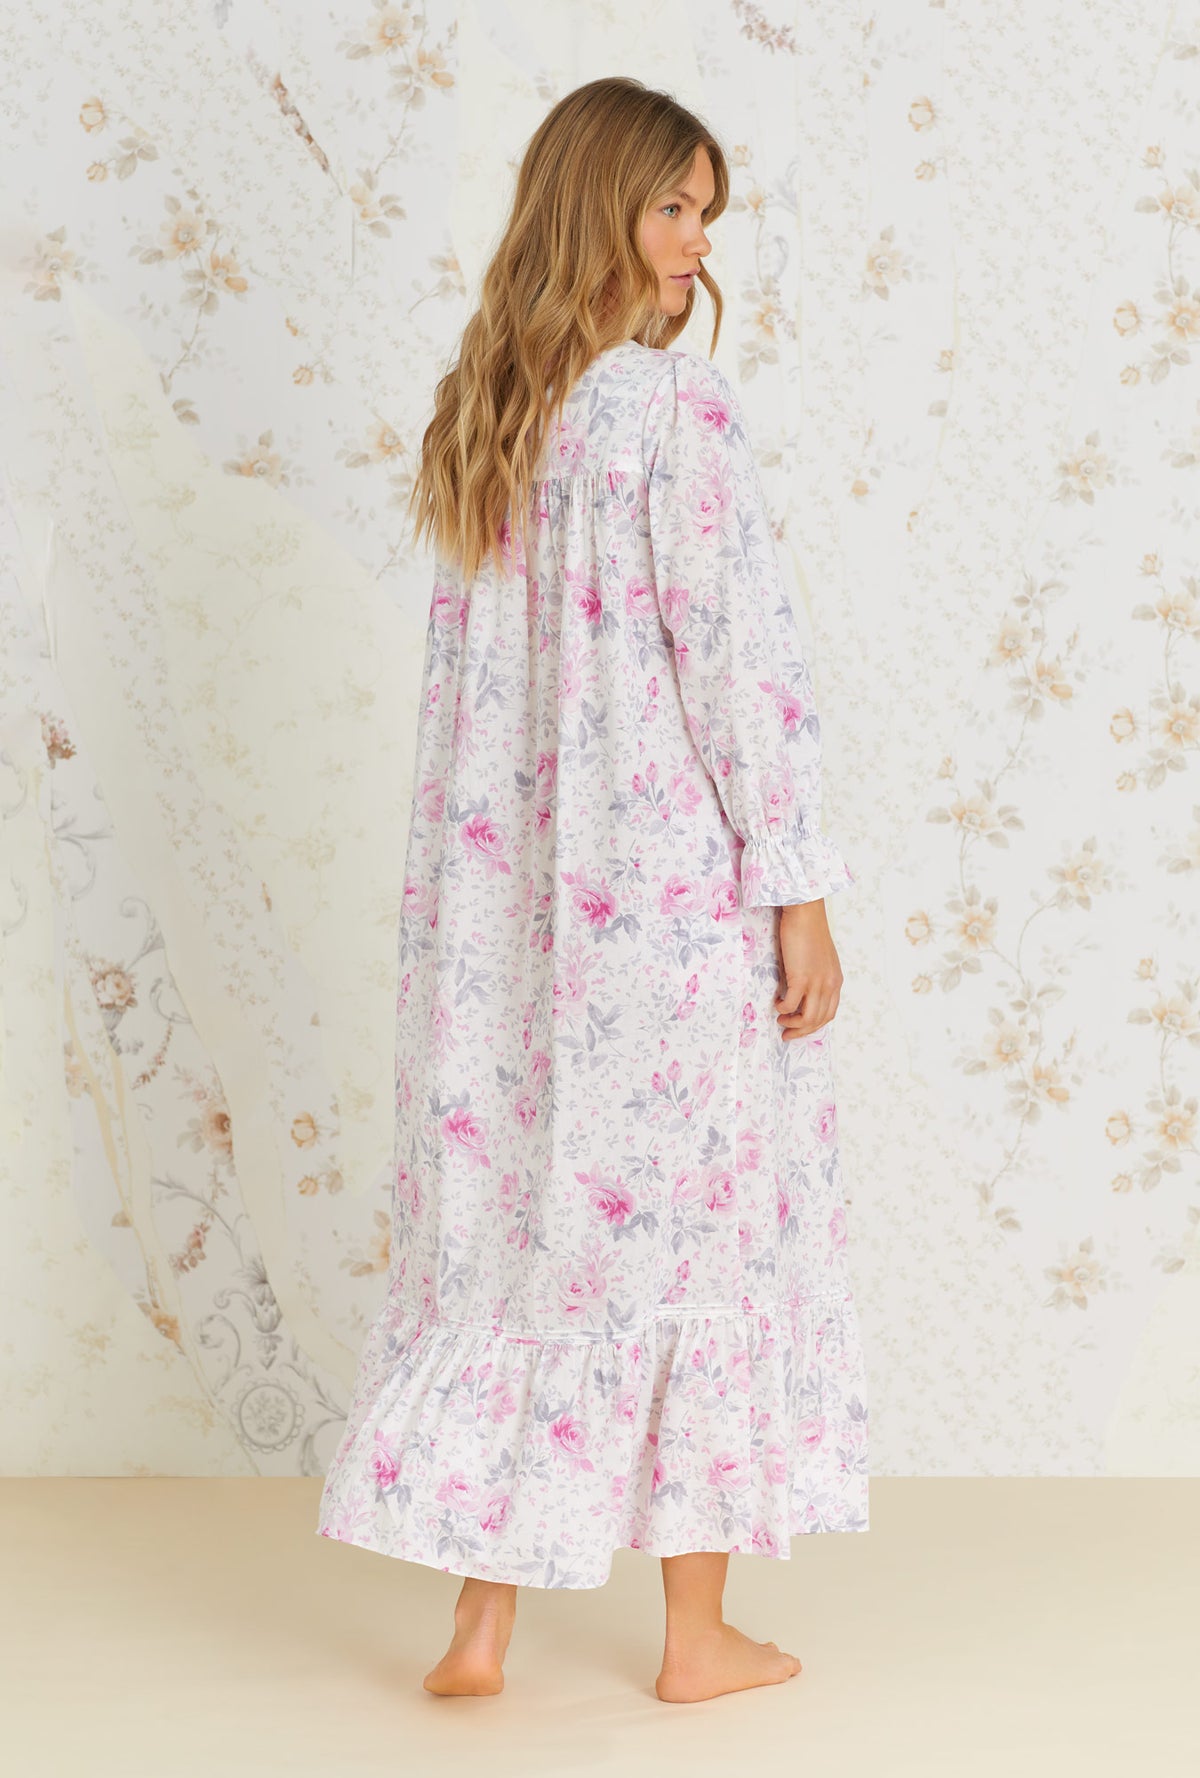 A lady wearing white long sleeve cotton button front robe with mendocino rose print.